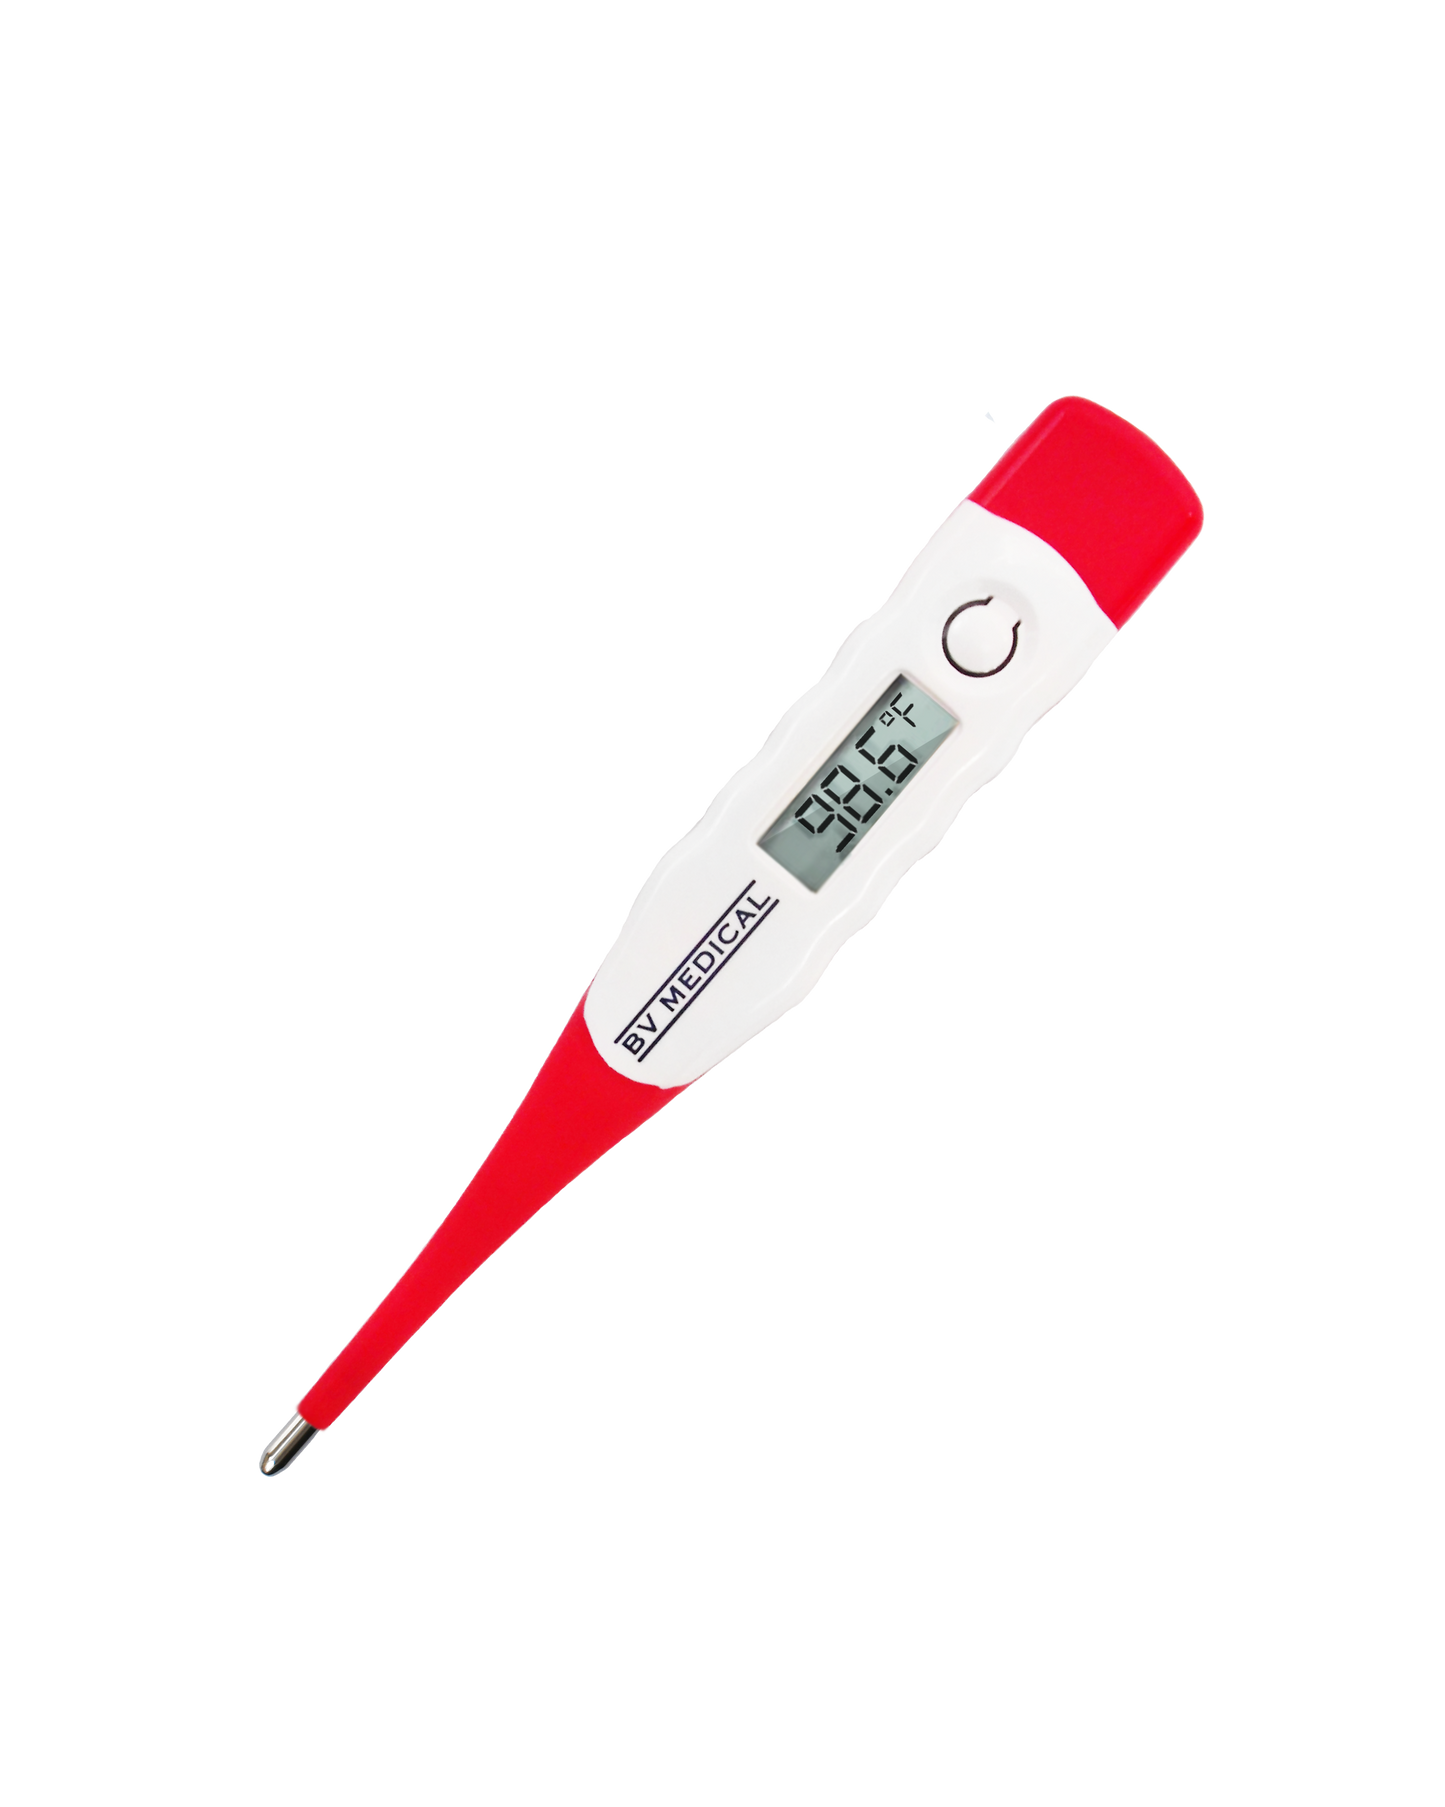 BV Medical Basic Digital Thermometer 10 Second Readout (40-100-010-L)